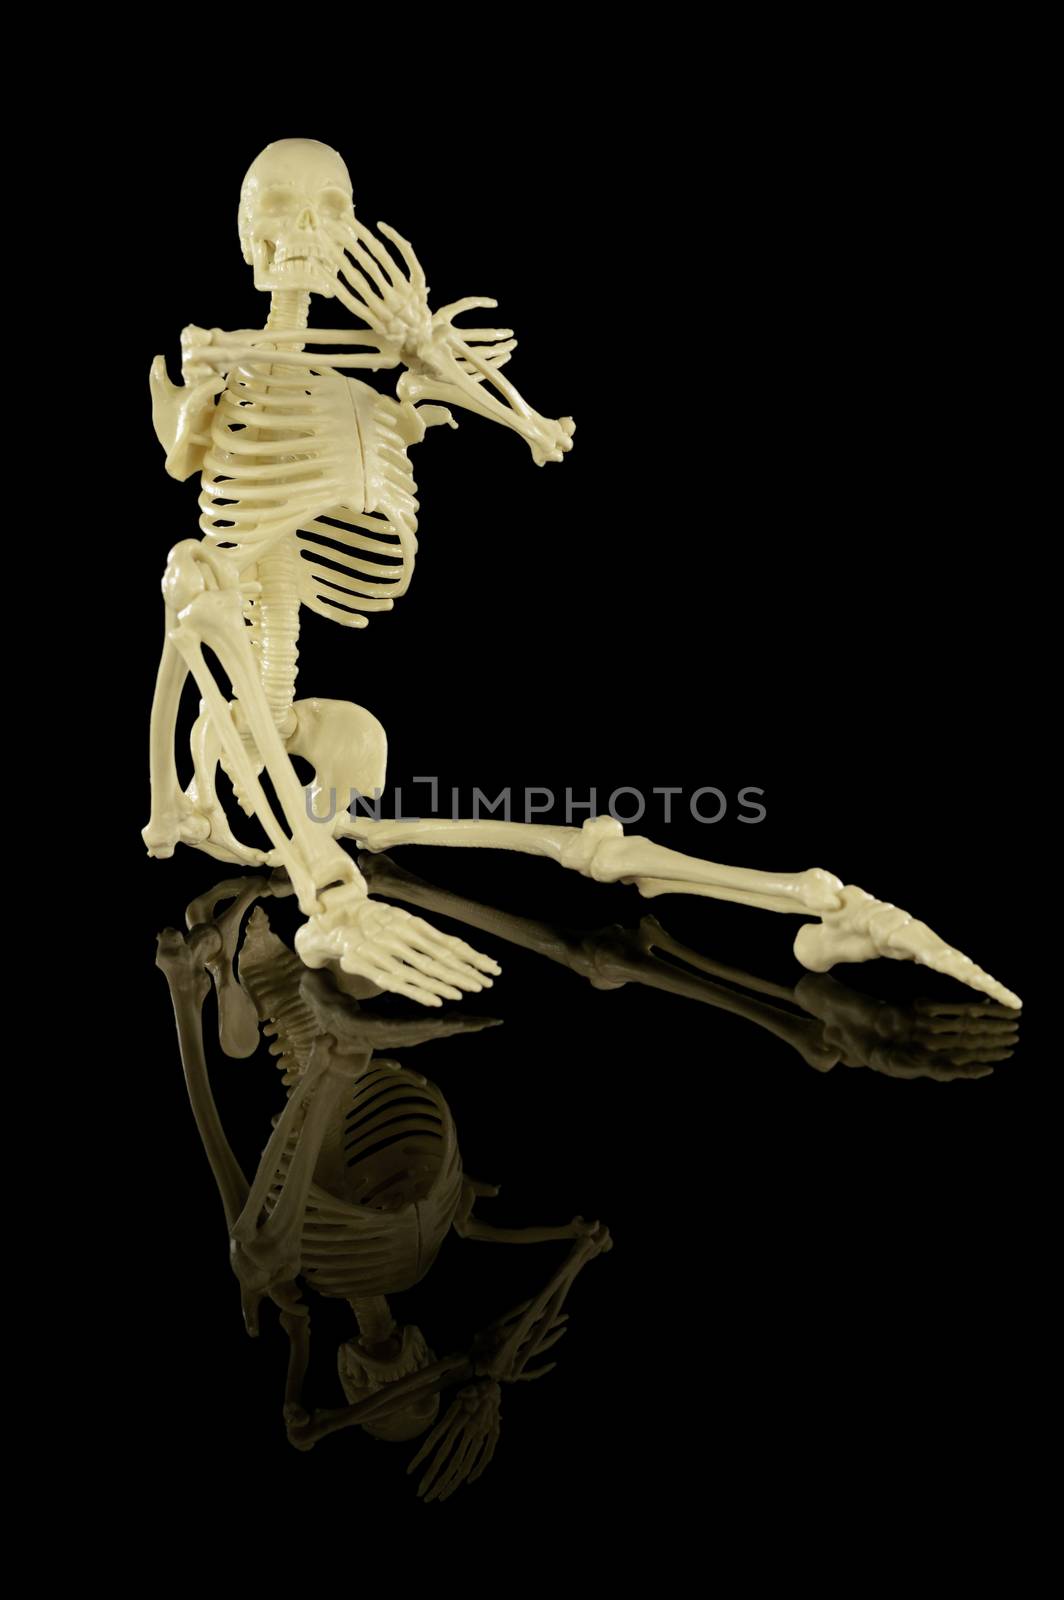 An isolated over black reflective background image of a whole human skeleton body.